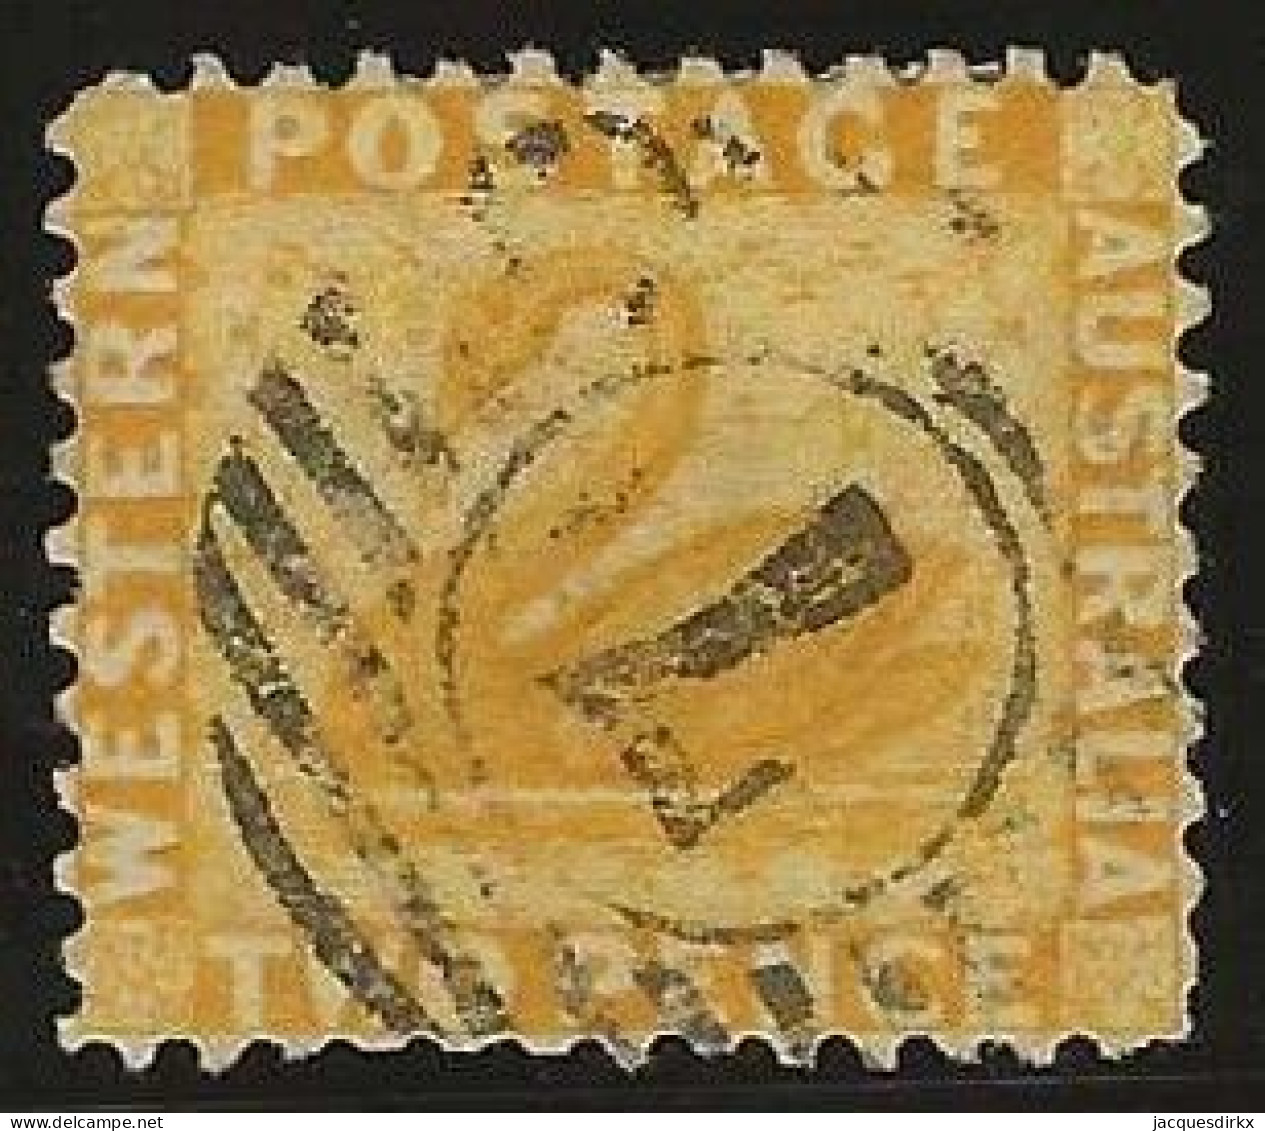 Western Australia     .   SG    .    82          .   O      .     Cancelled - Used Stamps